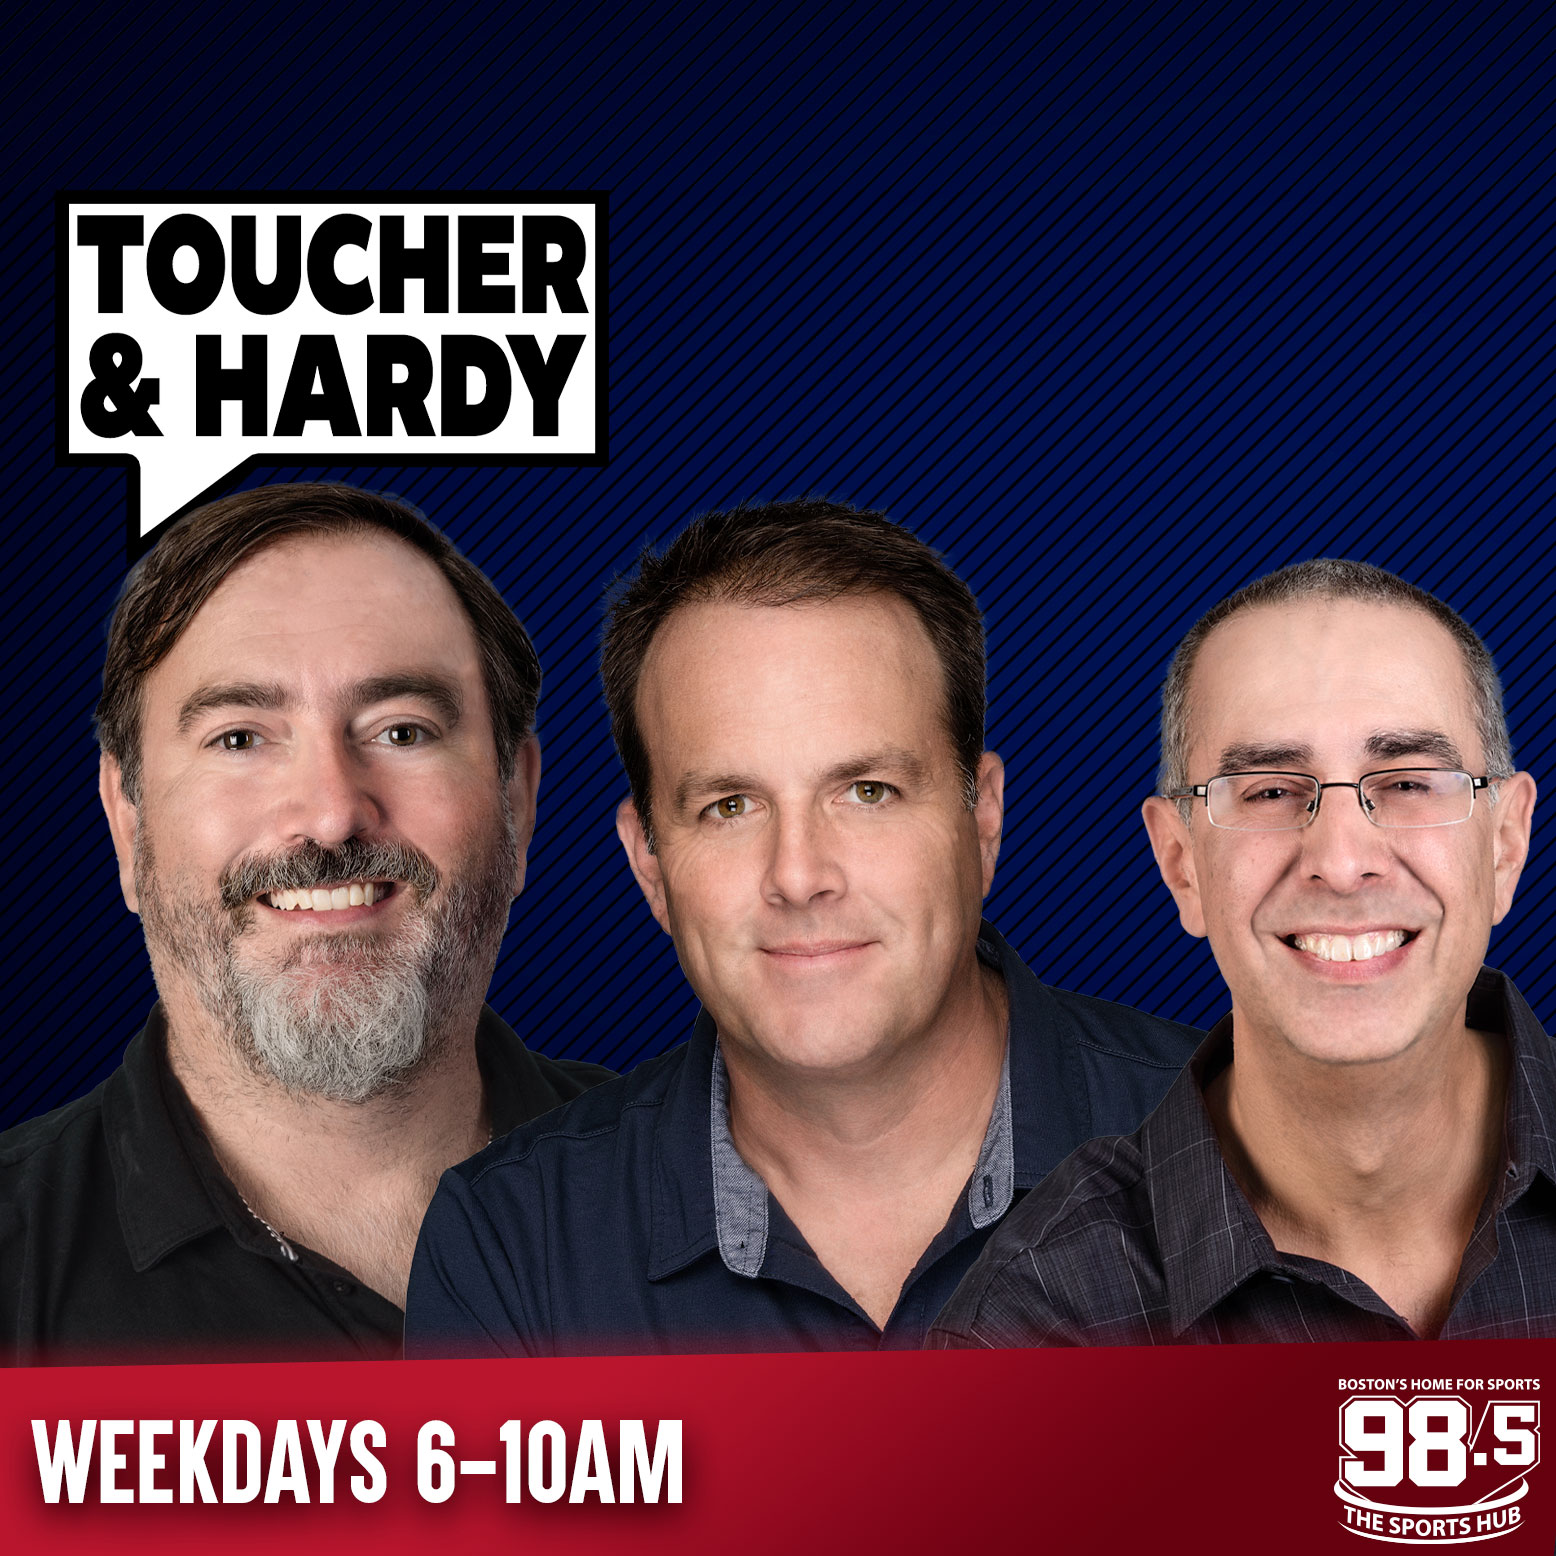 Fred Toucher doubts Patriots' facility upgrades will actually happen - Toucher & Hardy